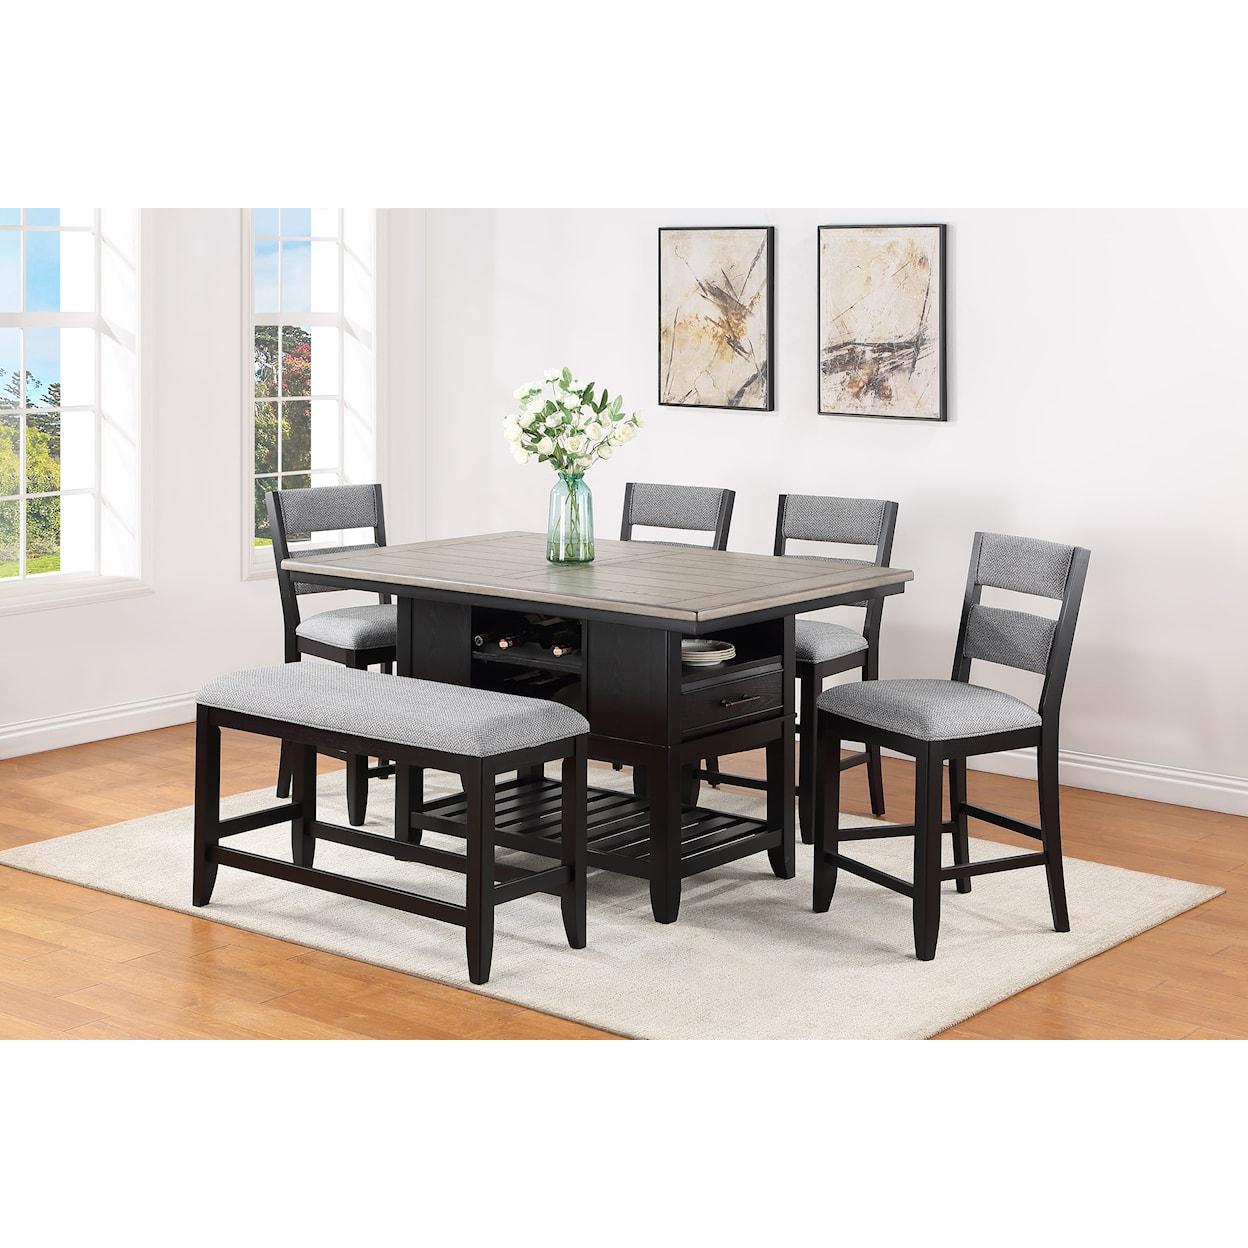 CM Wendy Counter-Height Dining Set